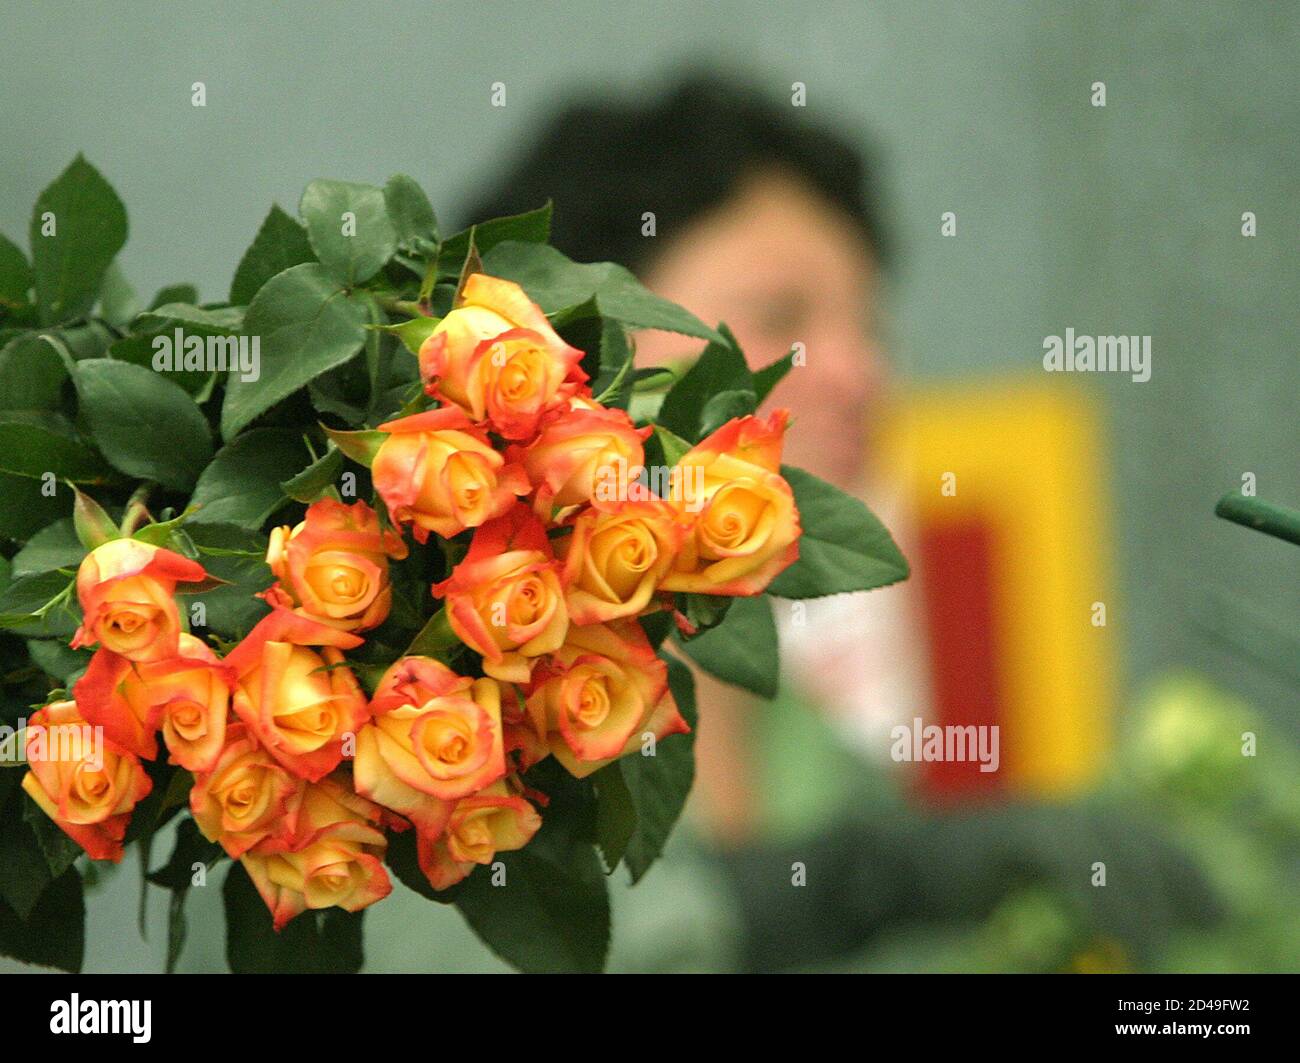 A Colombian woman prepares flowers for export ahead of Valentine's Day in  Tenjo, Cundinamarca province, February 11, 2004. Colombia is the world's  second largest flower exporter, and Valentine's Day shipments are the